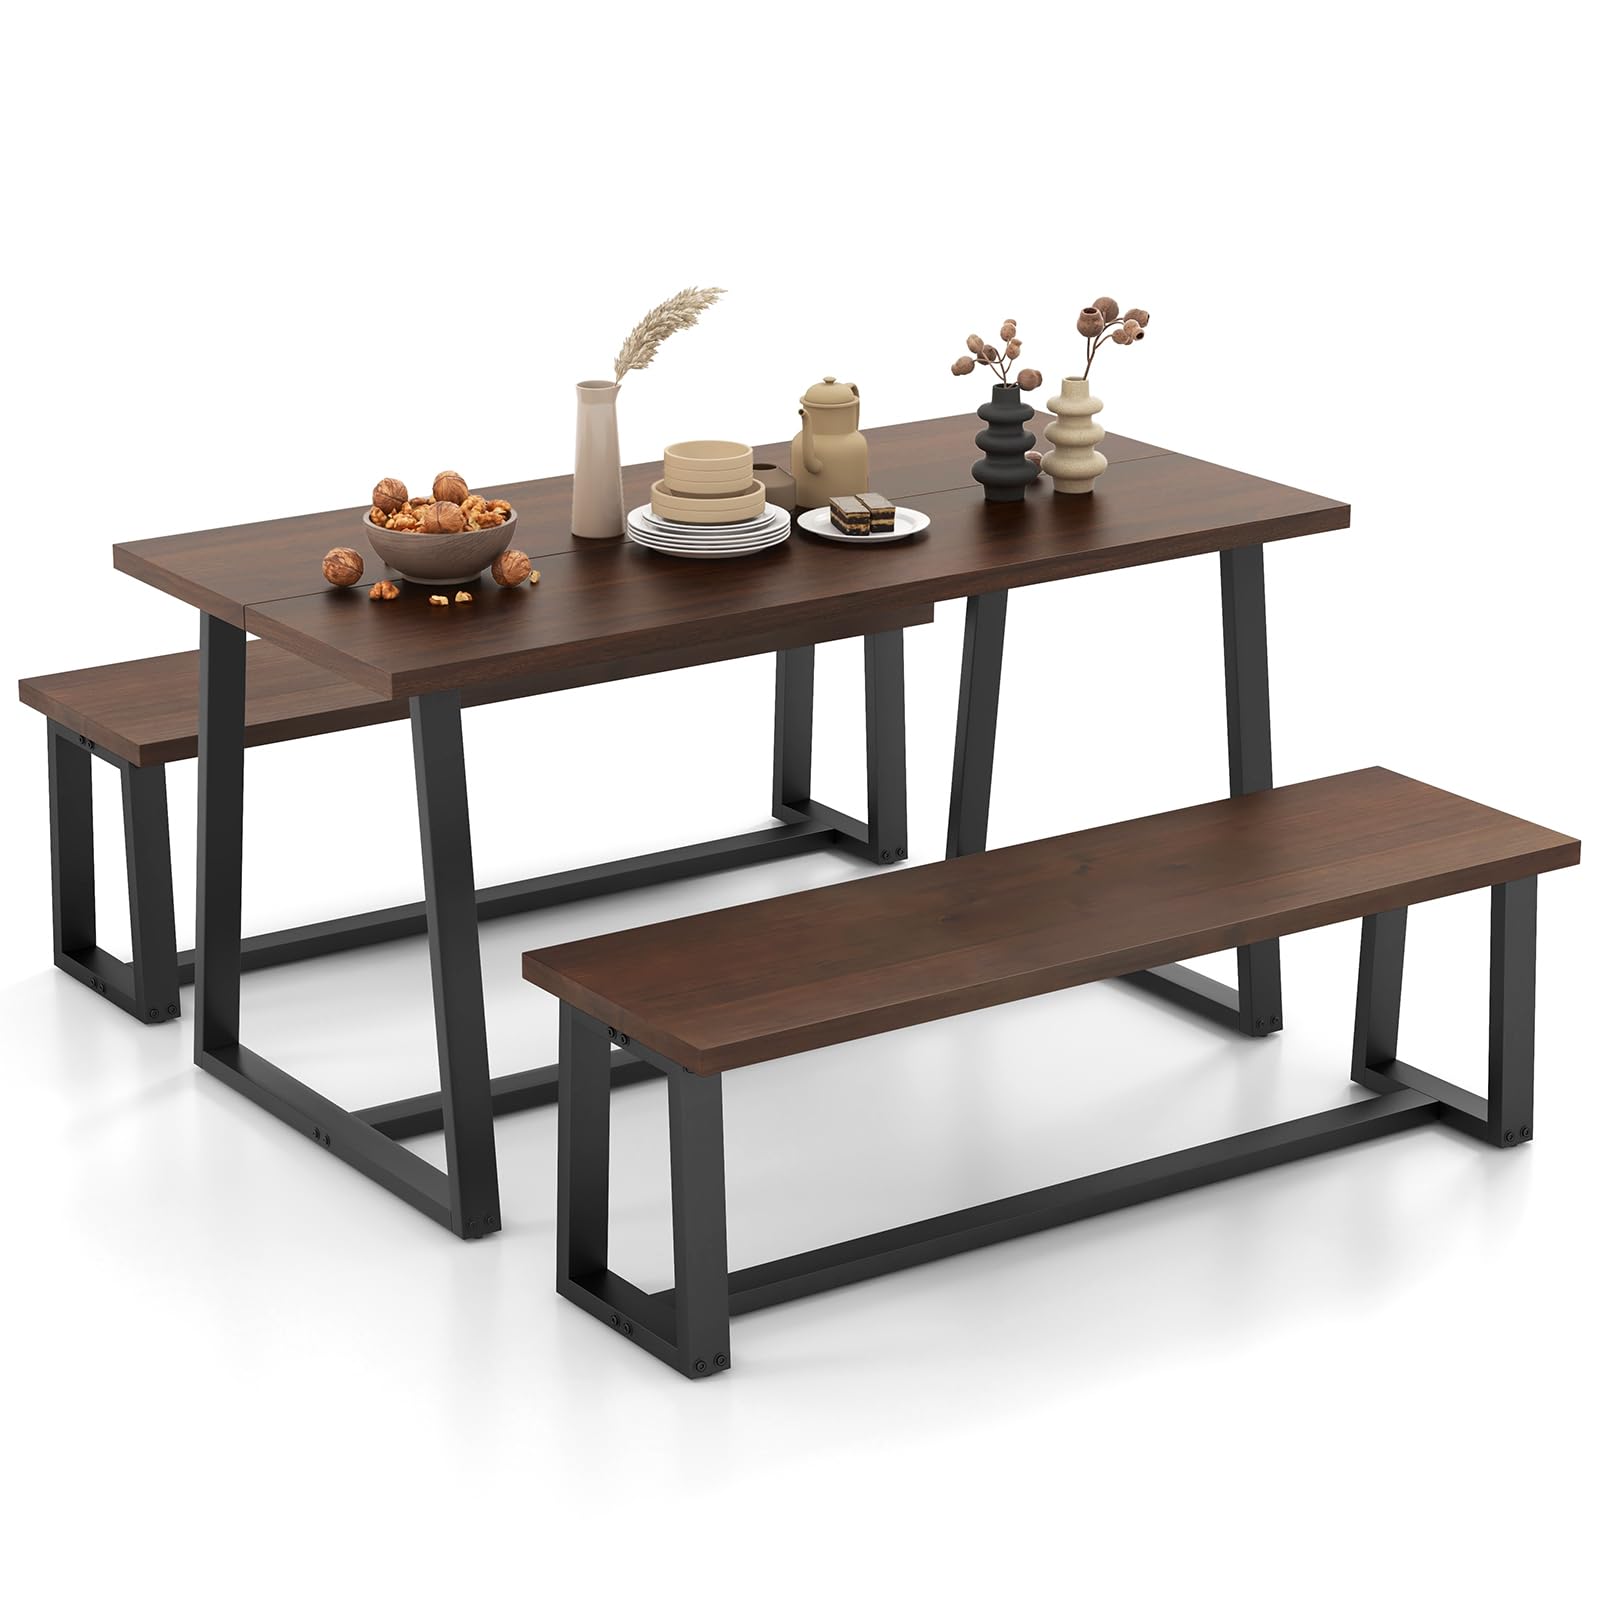 Giantex Dining Table Set for 4, 63” Table and 56.5” Benches Set for 4-6 People with Metal Frame